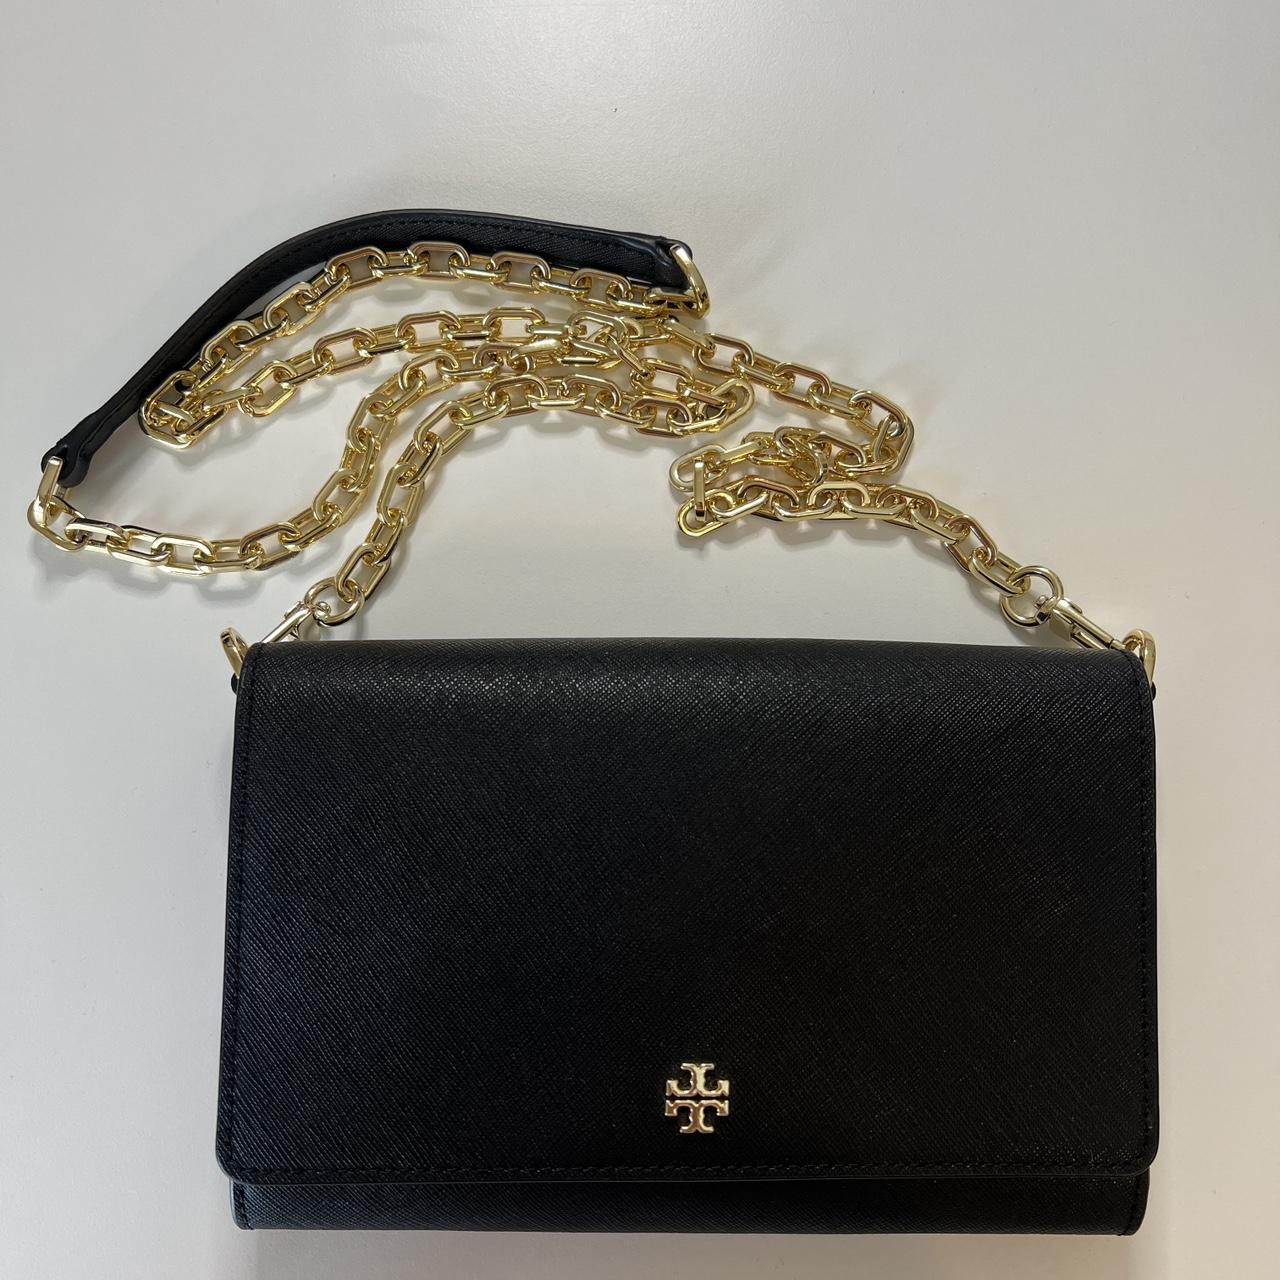 Tory Burch Black Cross Body Bag, Barely used in